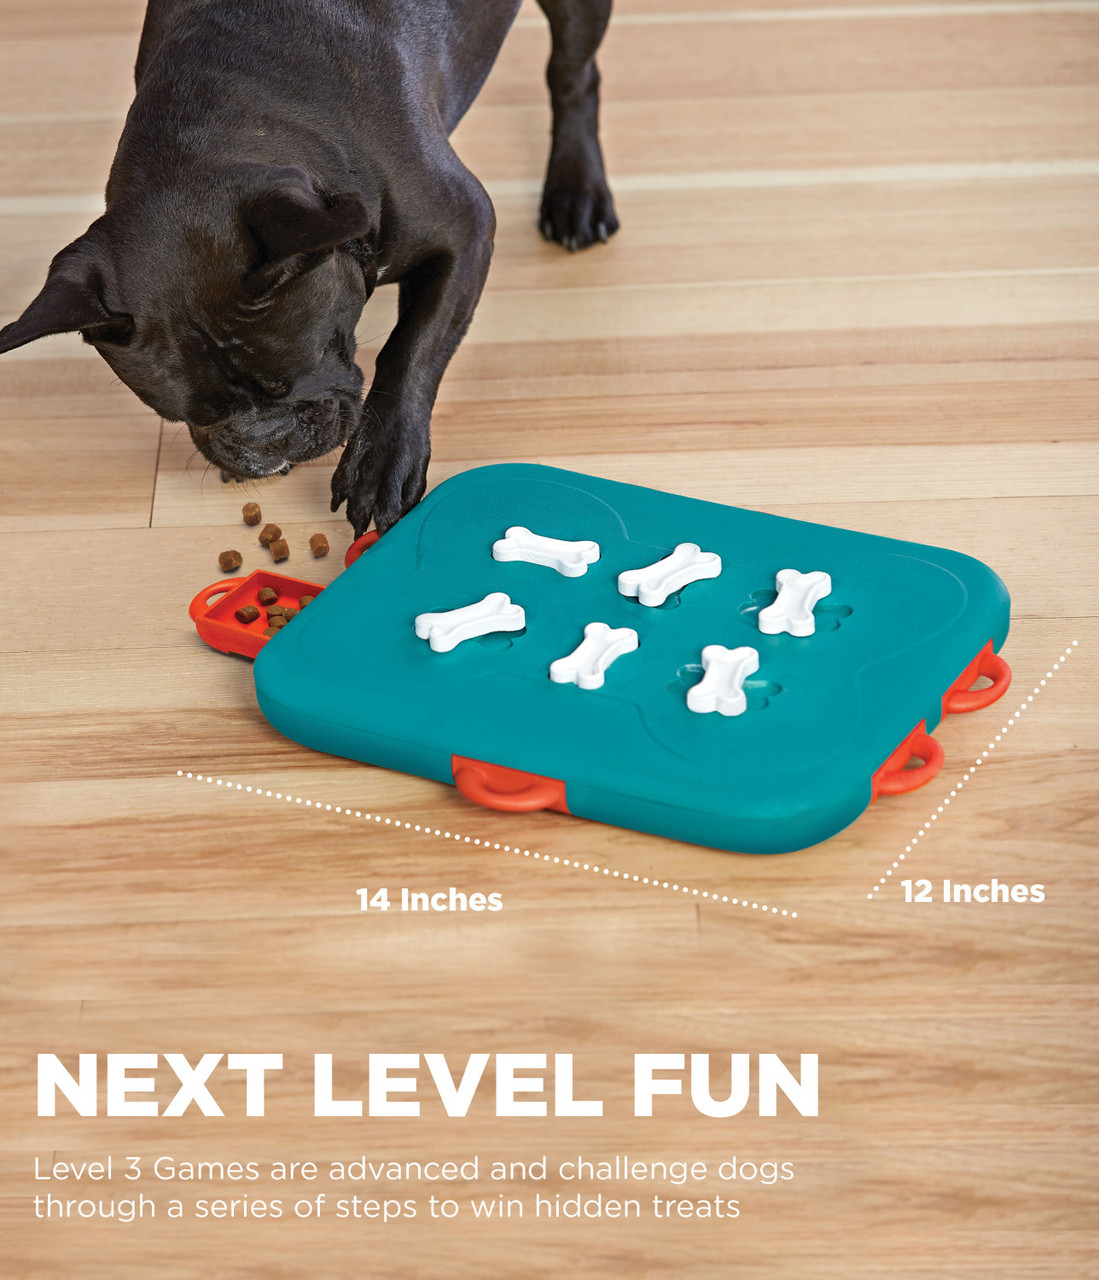 Bringing out the brightest pup in Nami with these dog puzzles! 🐾❤️ I